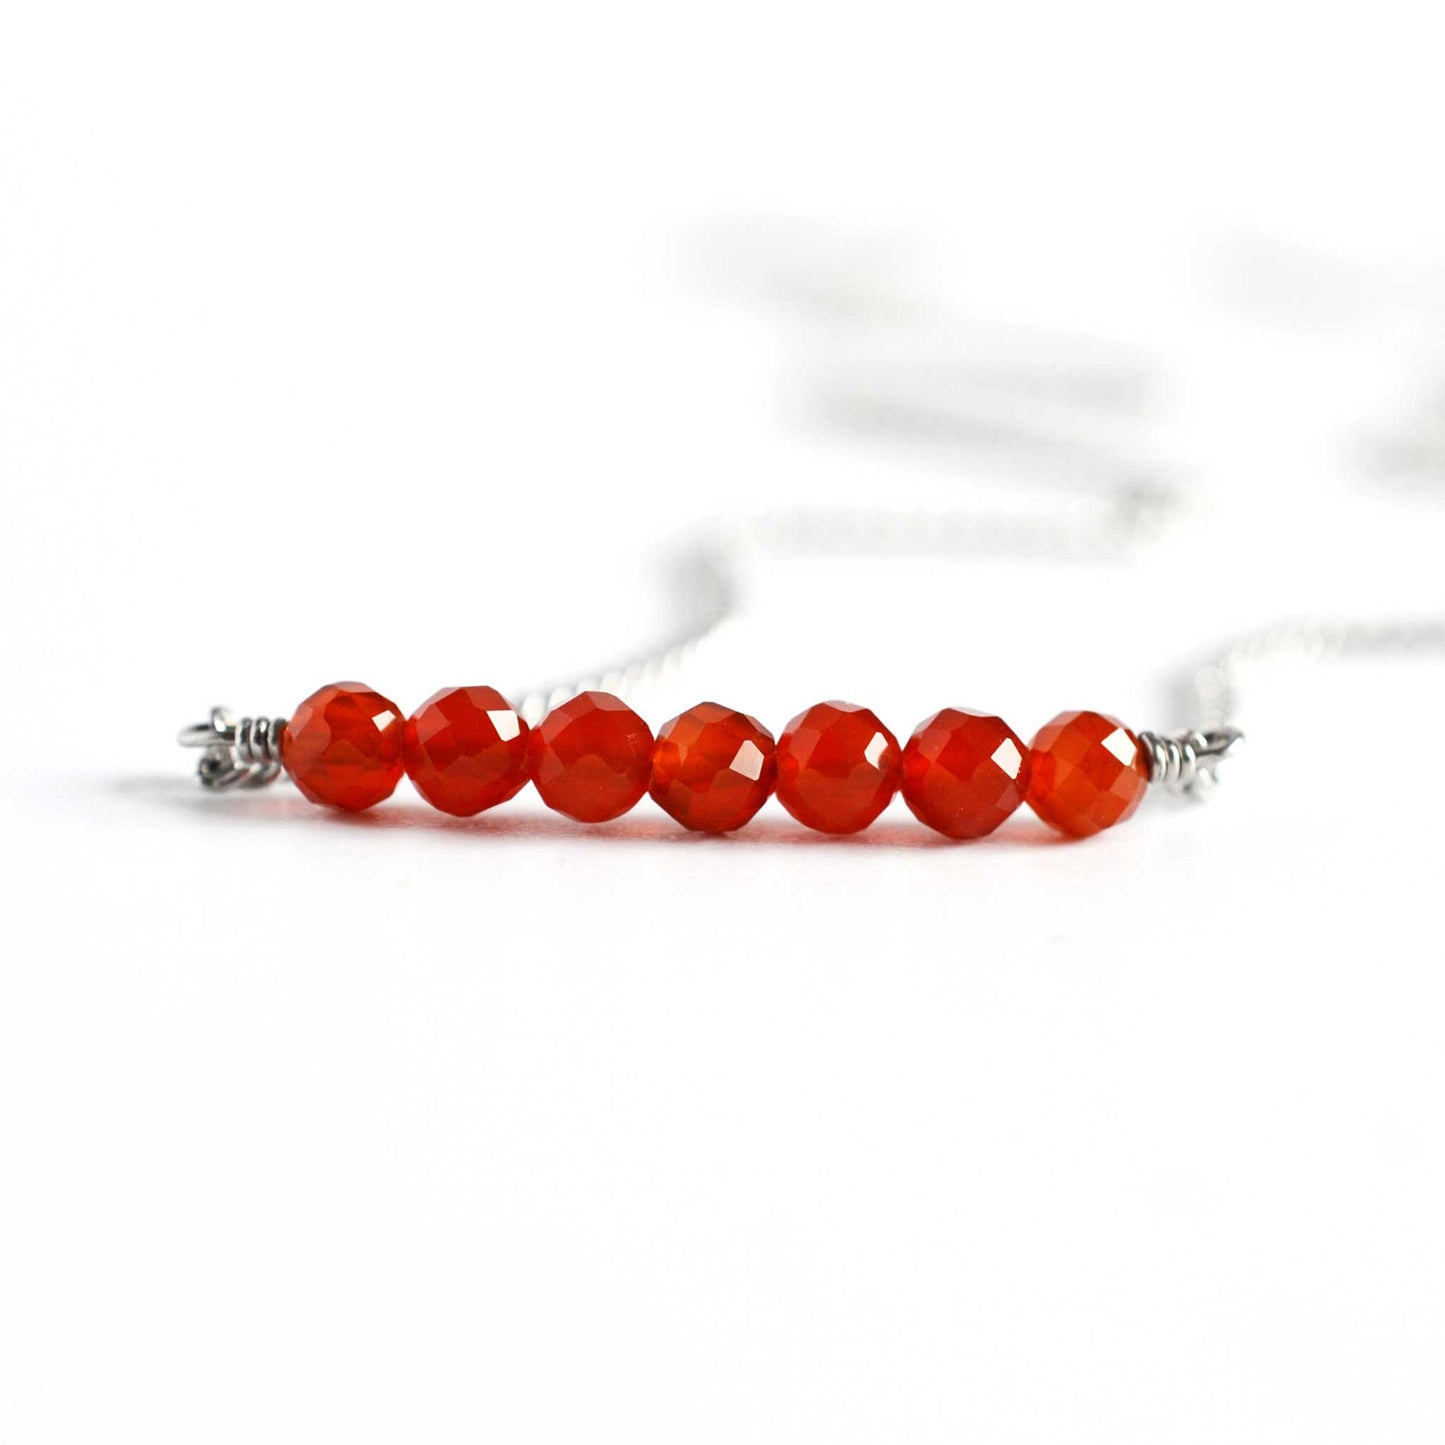 Close up of Carnelian necklace with seven small round faceted orange Carnelian gemstones